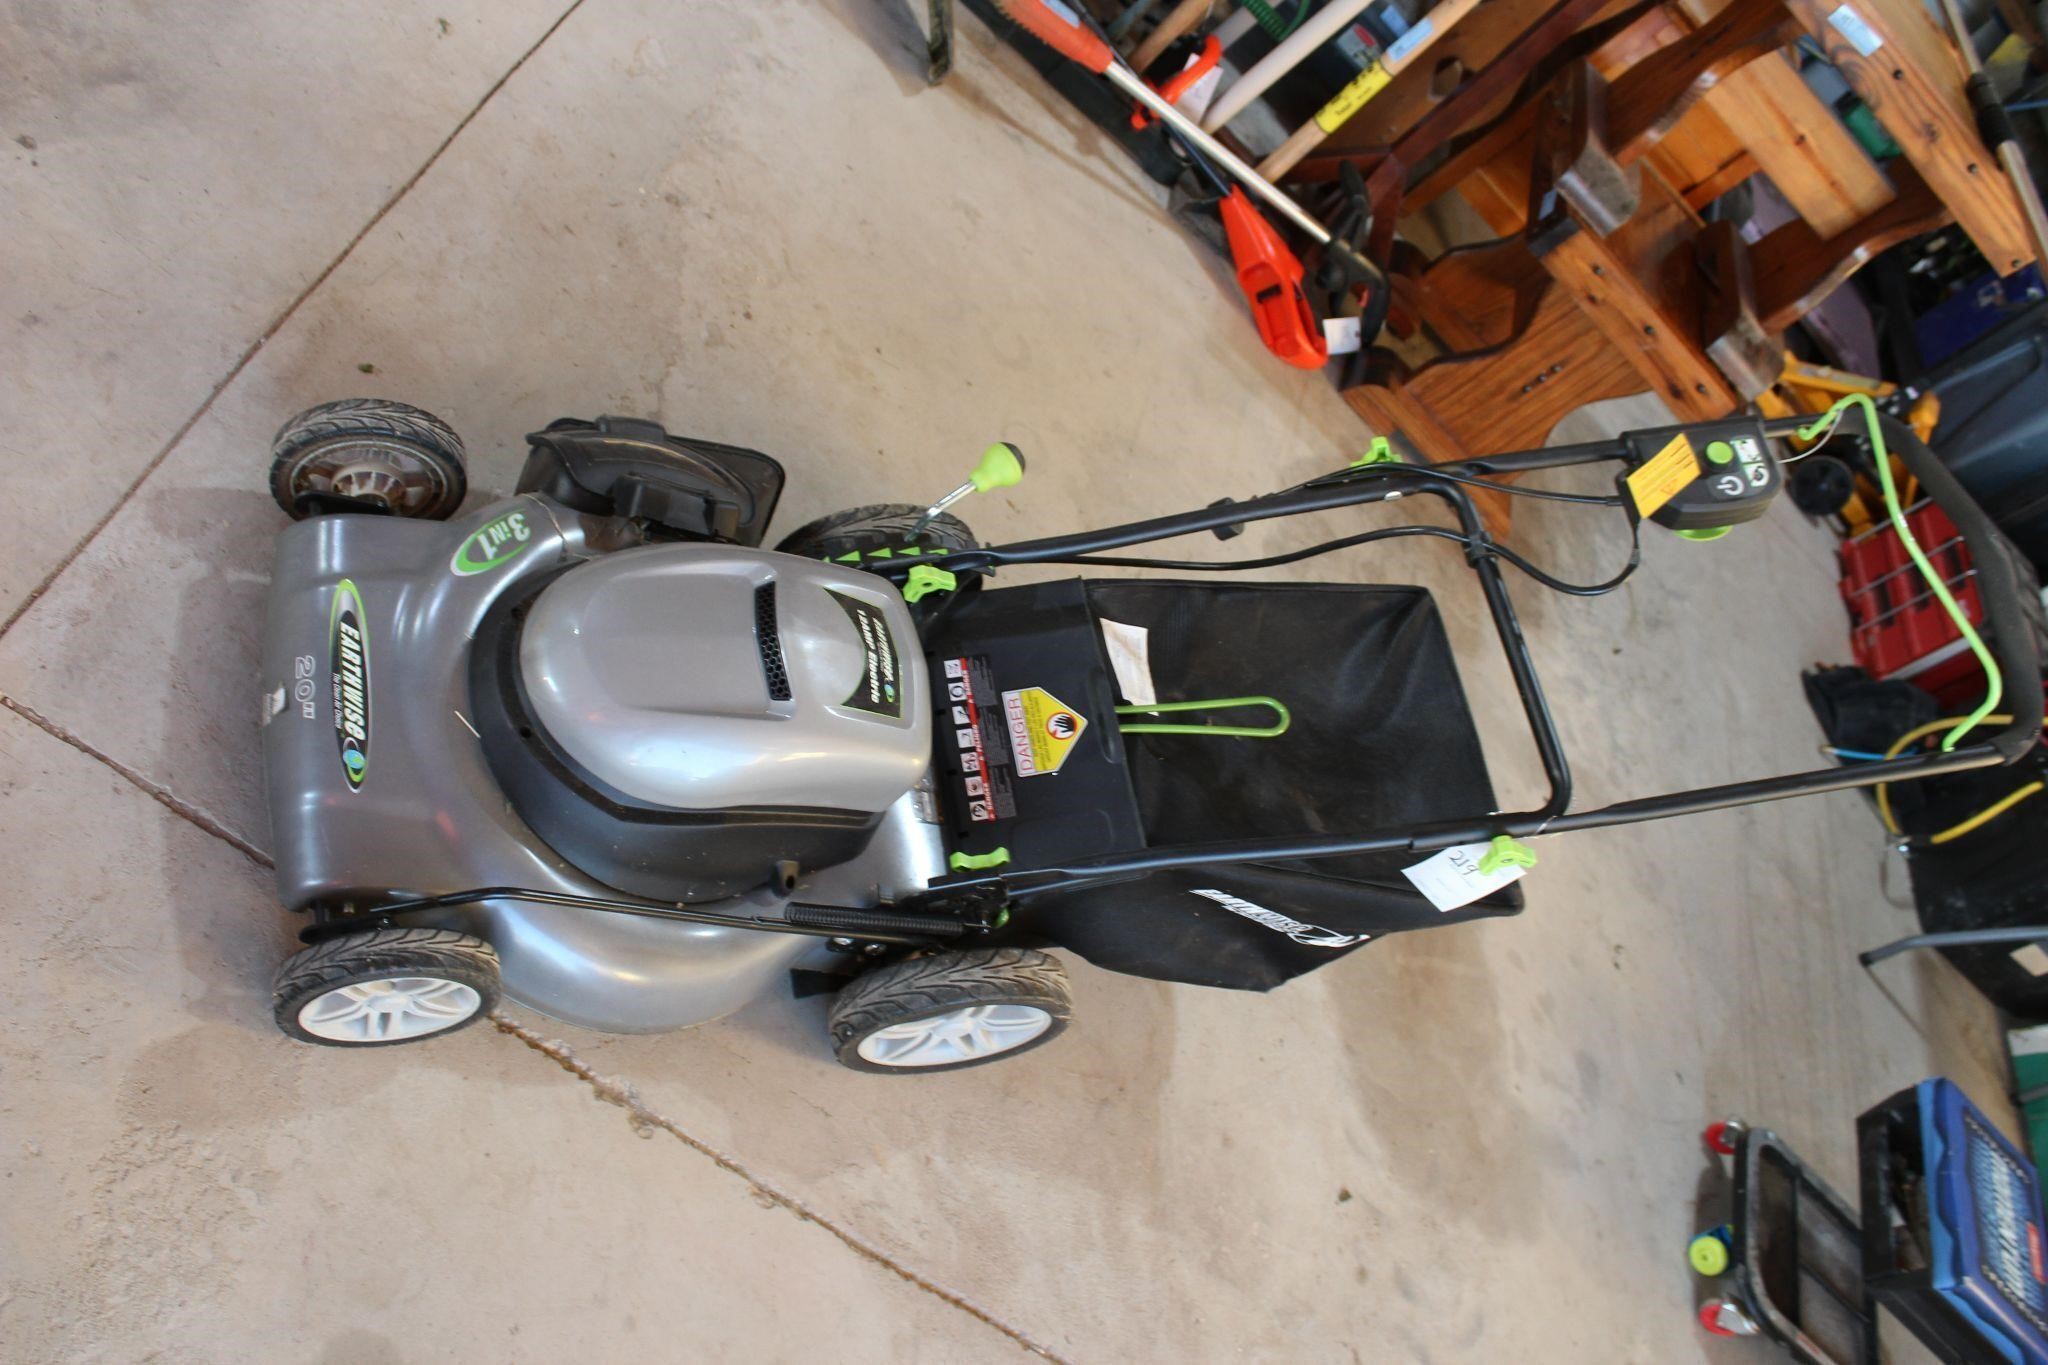 Earth Wise Electric Lawnmower 20"